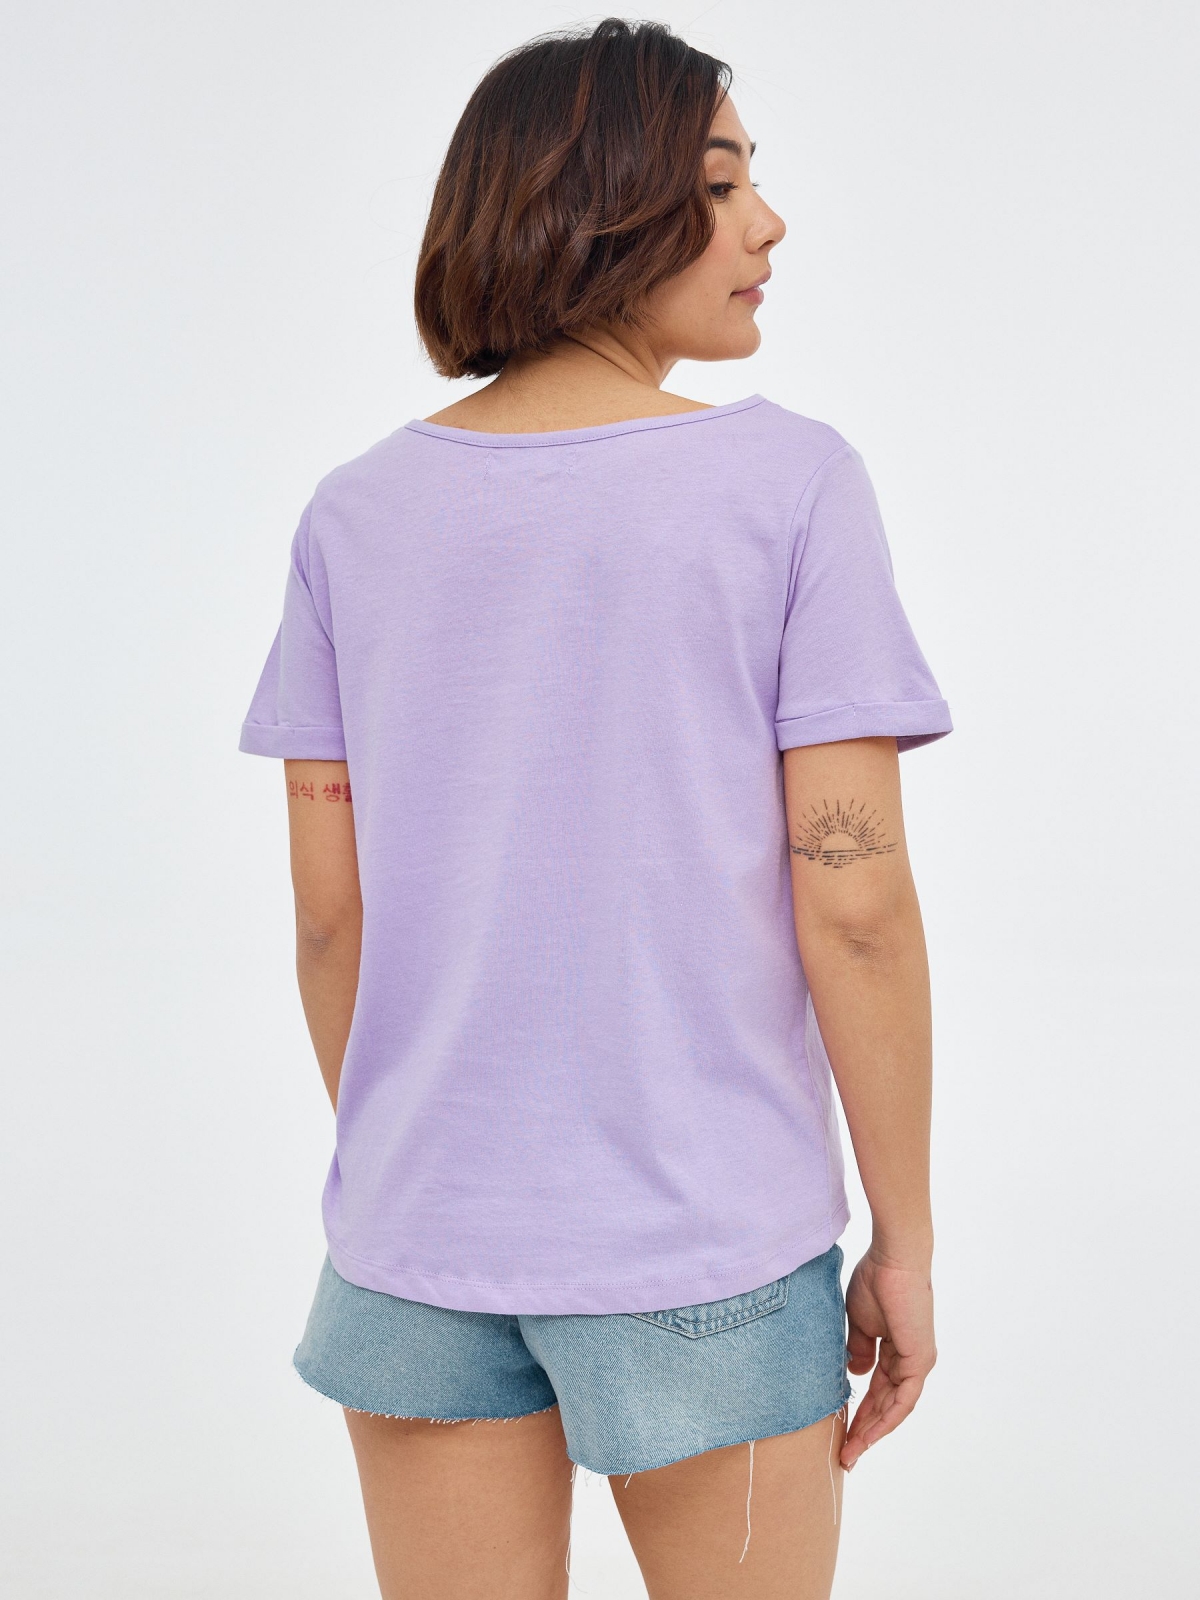 Tigers graphic T-shirt mauve middle back view